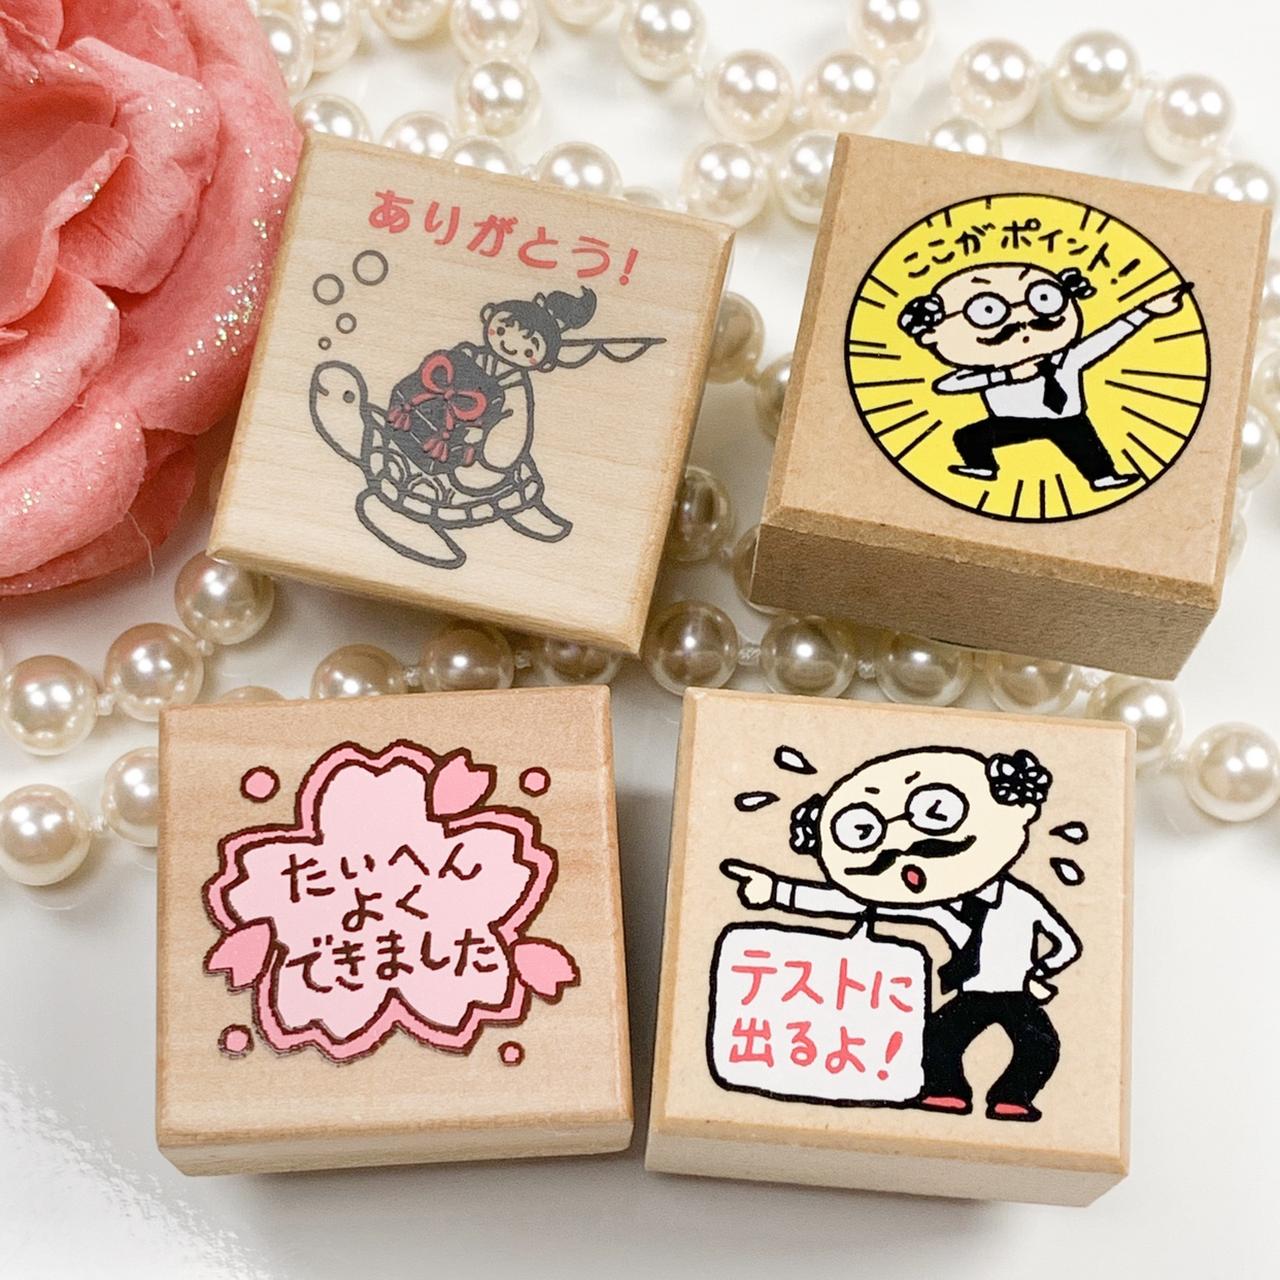 Kodomo no Kao stamps are intricately carved with fine attention to